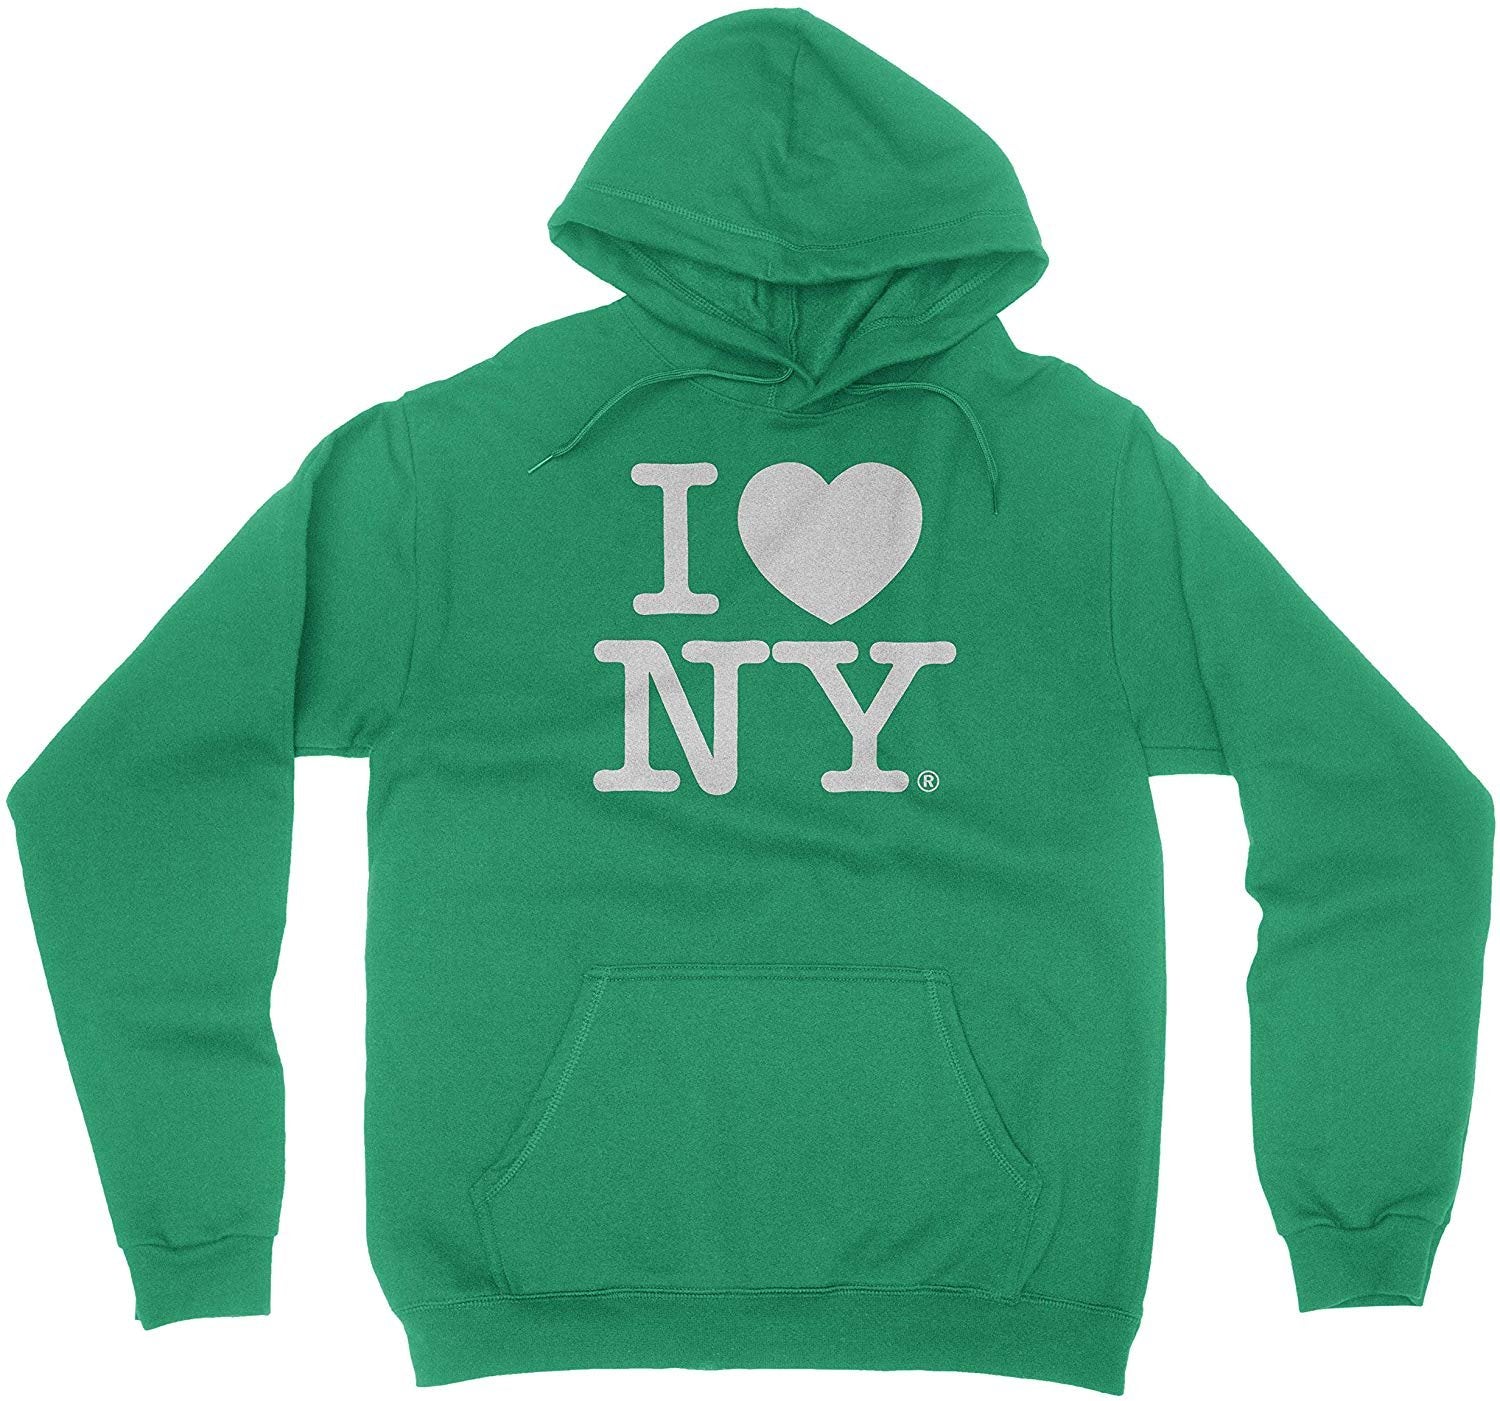 I Love New York Zip Up Hoodie Size Large Officially Licensed Product